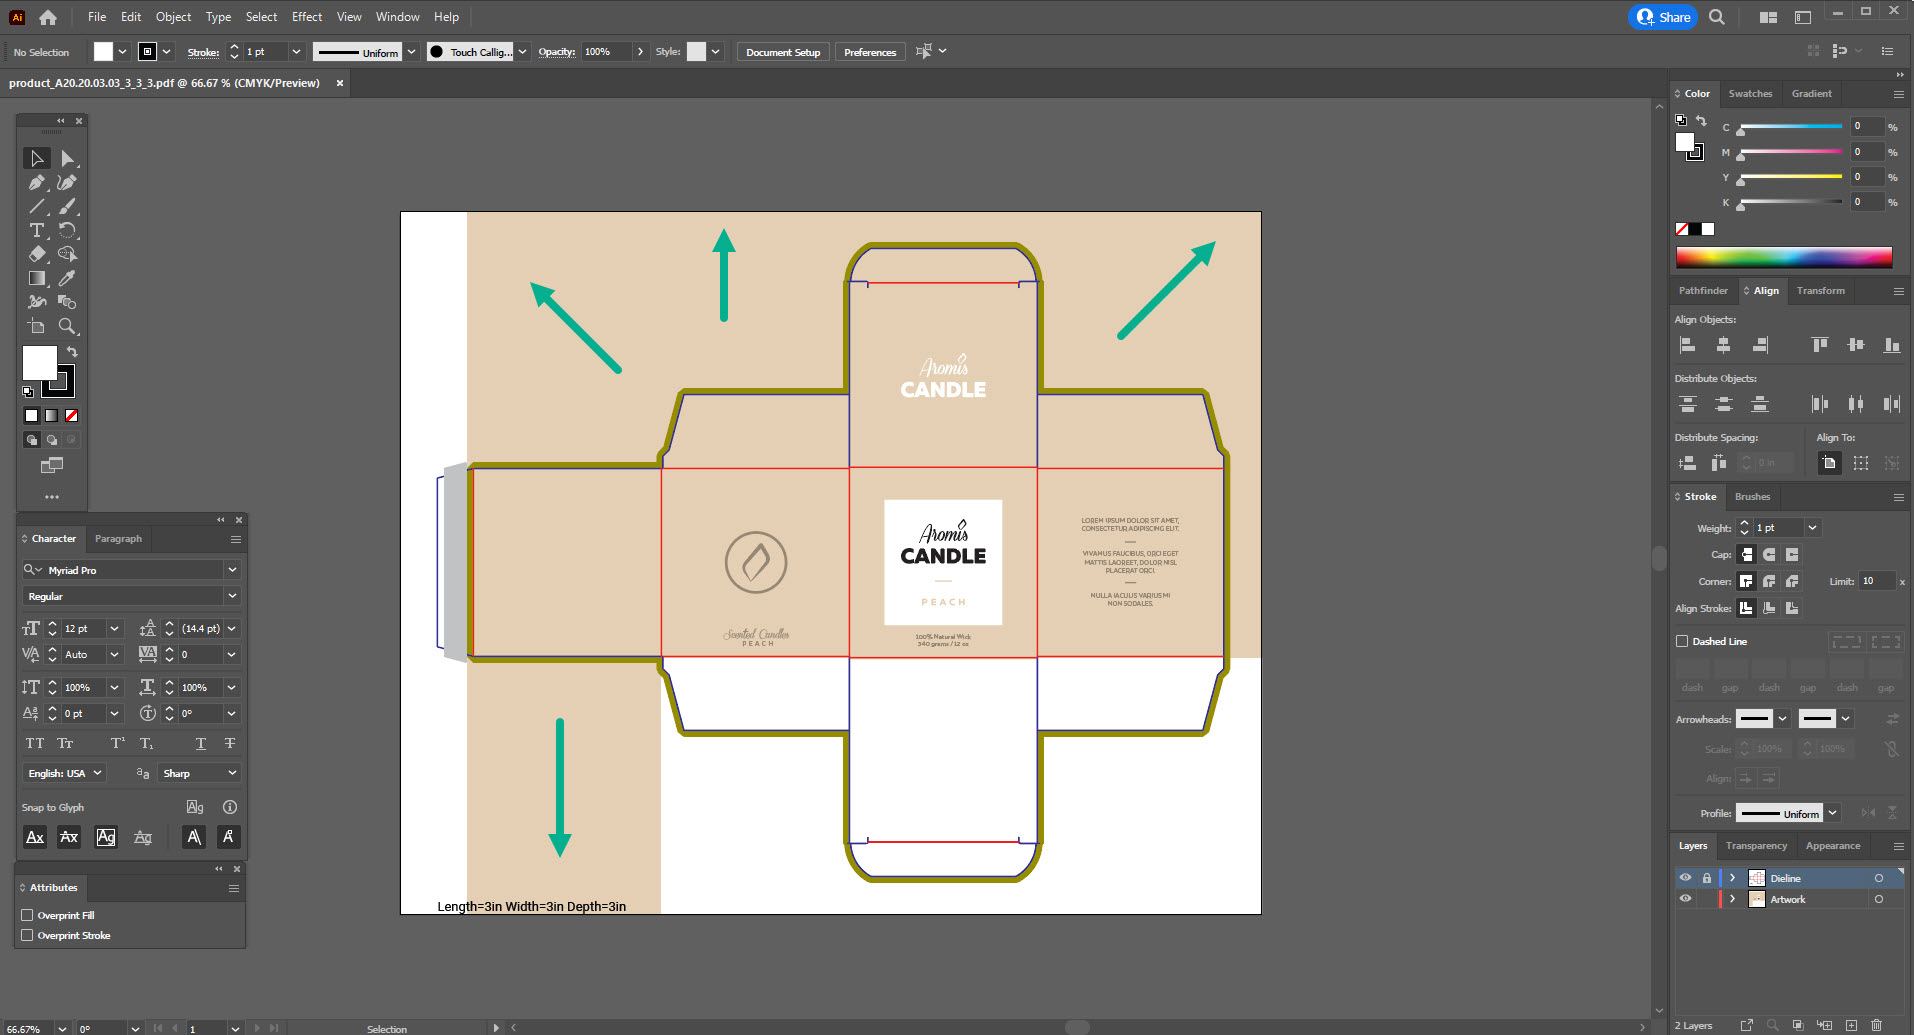 Adobe Express vs Canva, the screenshot of a box design in Adobe Illustrator showing extending objects all the way to the edges of the document.